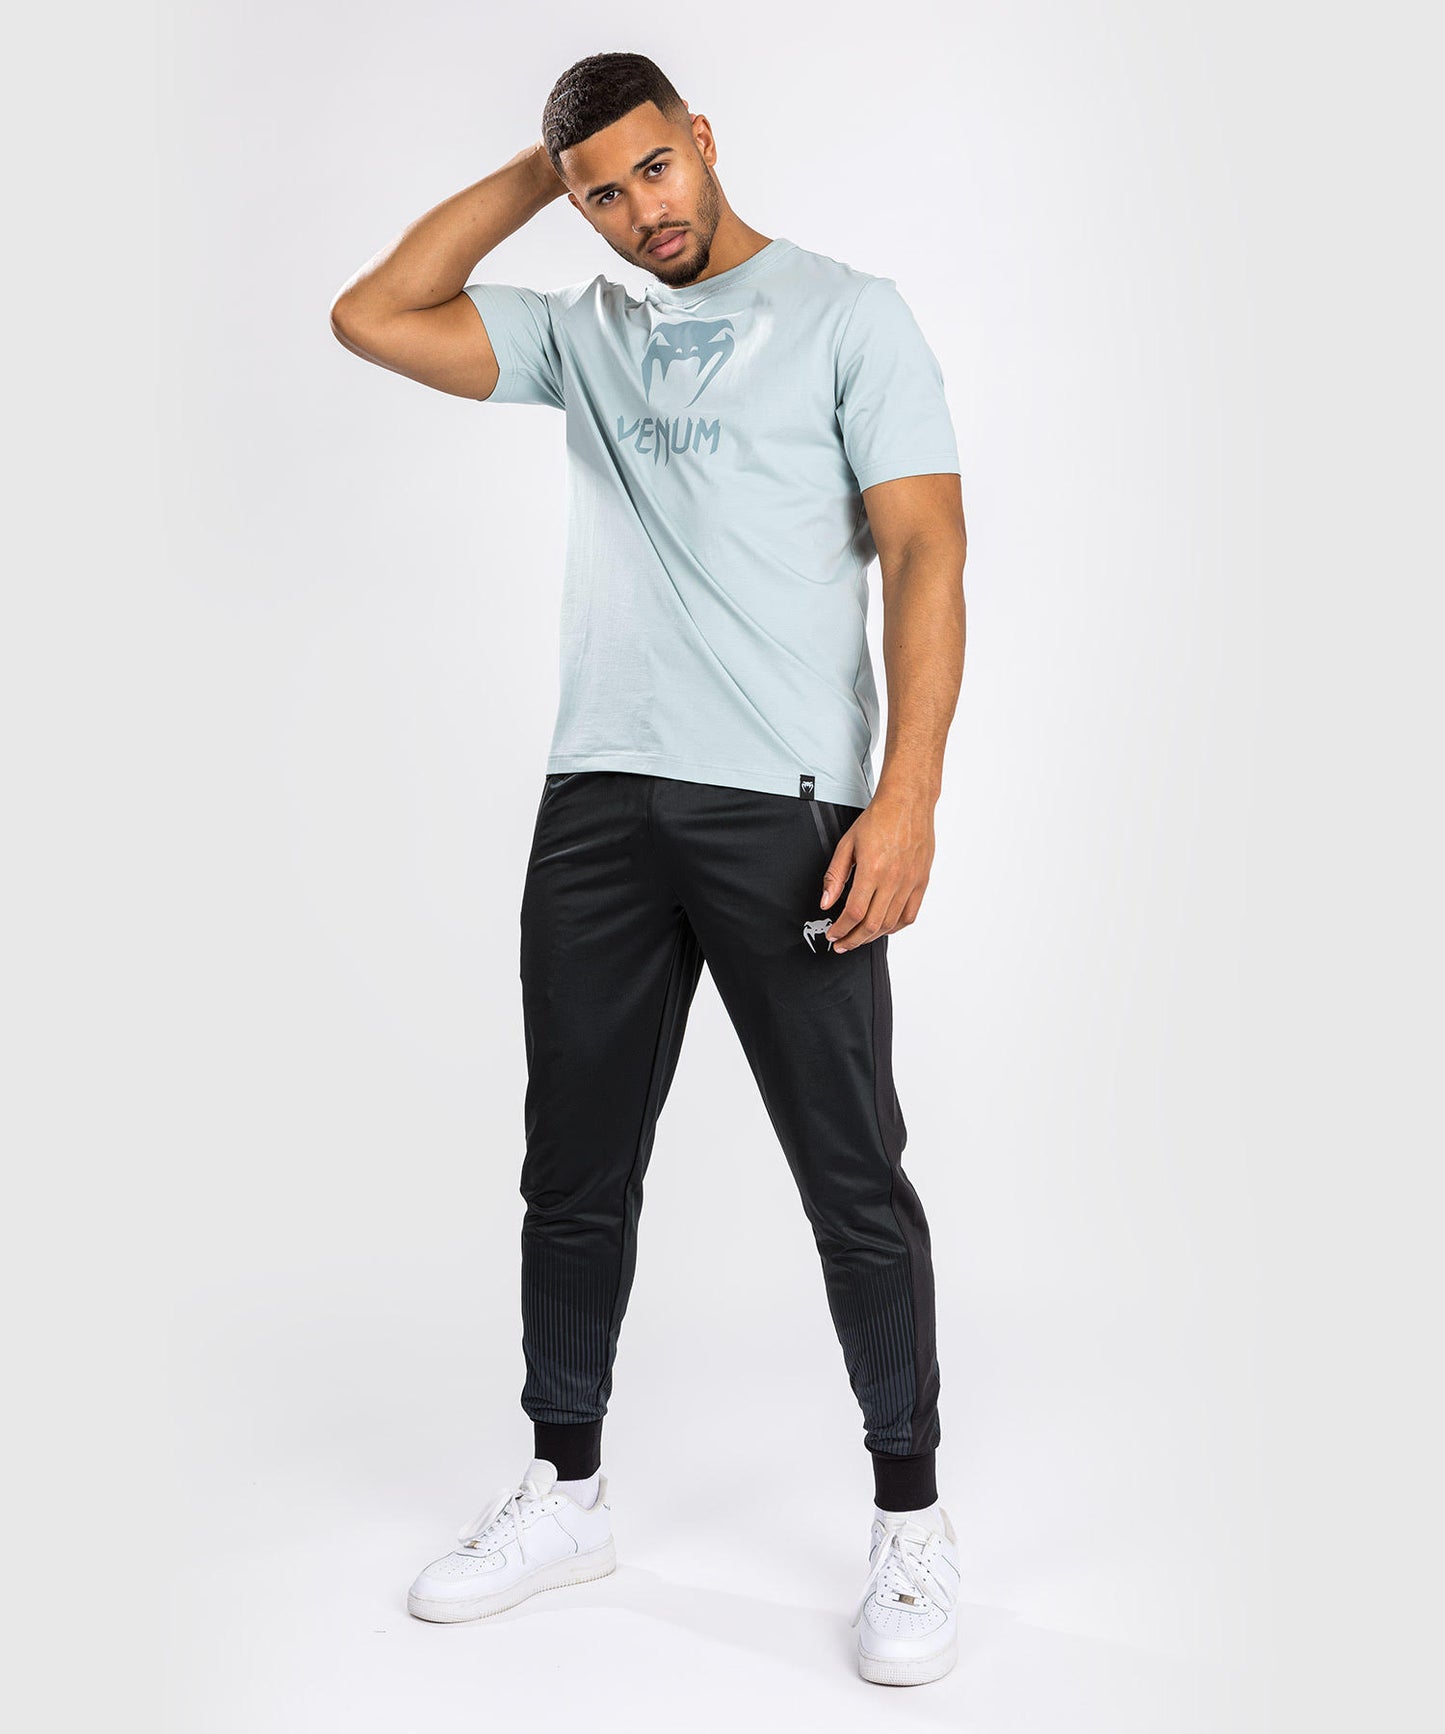 Venum Classic T-Shirt - Clearwater Blue/Clearwater Blue